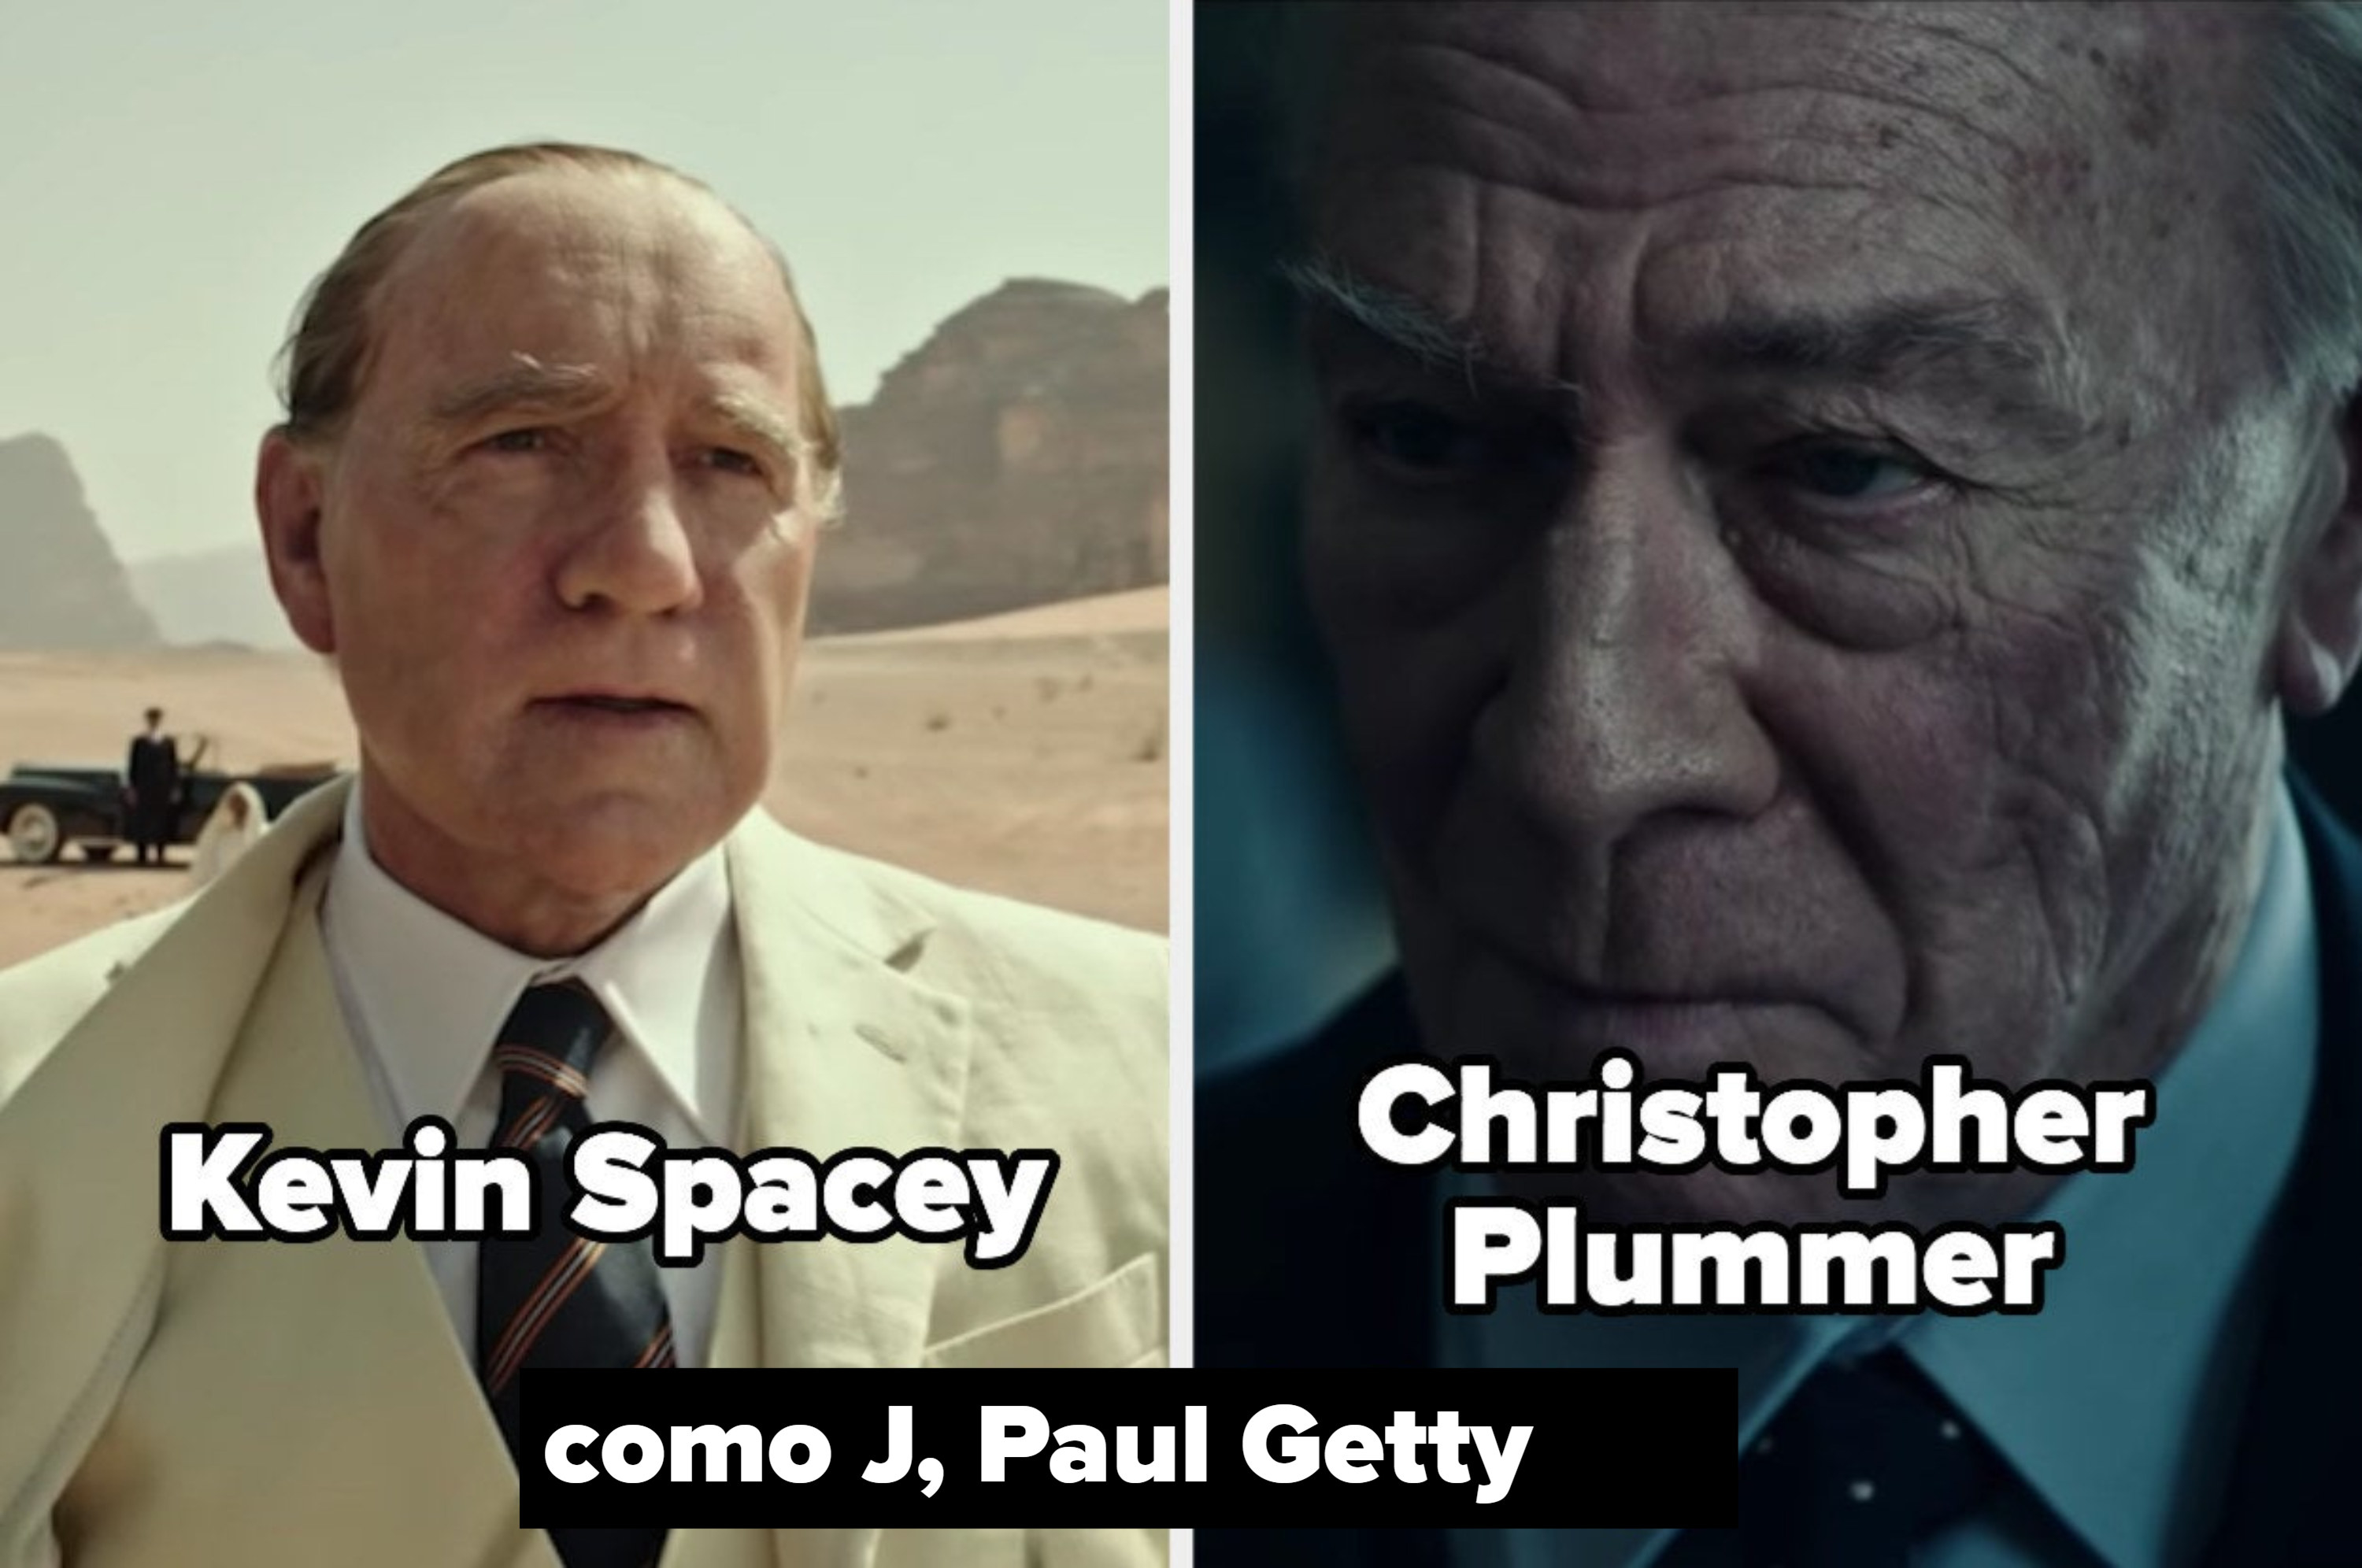 Kevin Spacey and Christopher Plummer side by side as J. Paul Getty